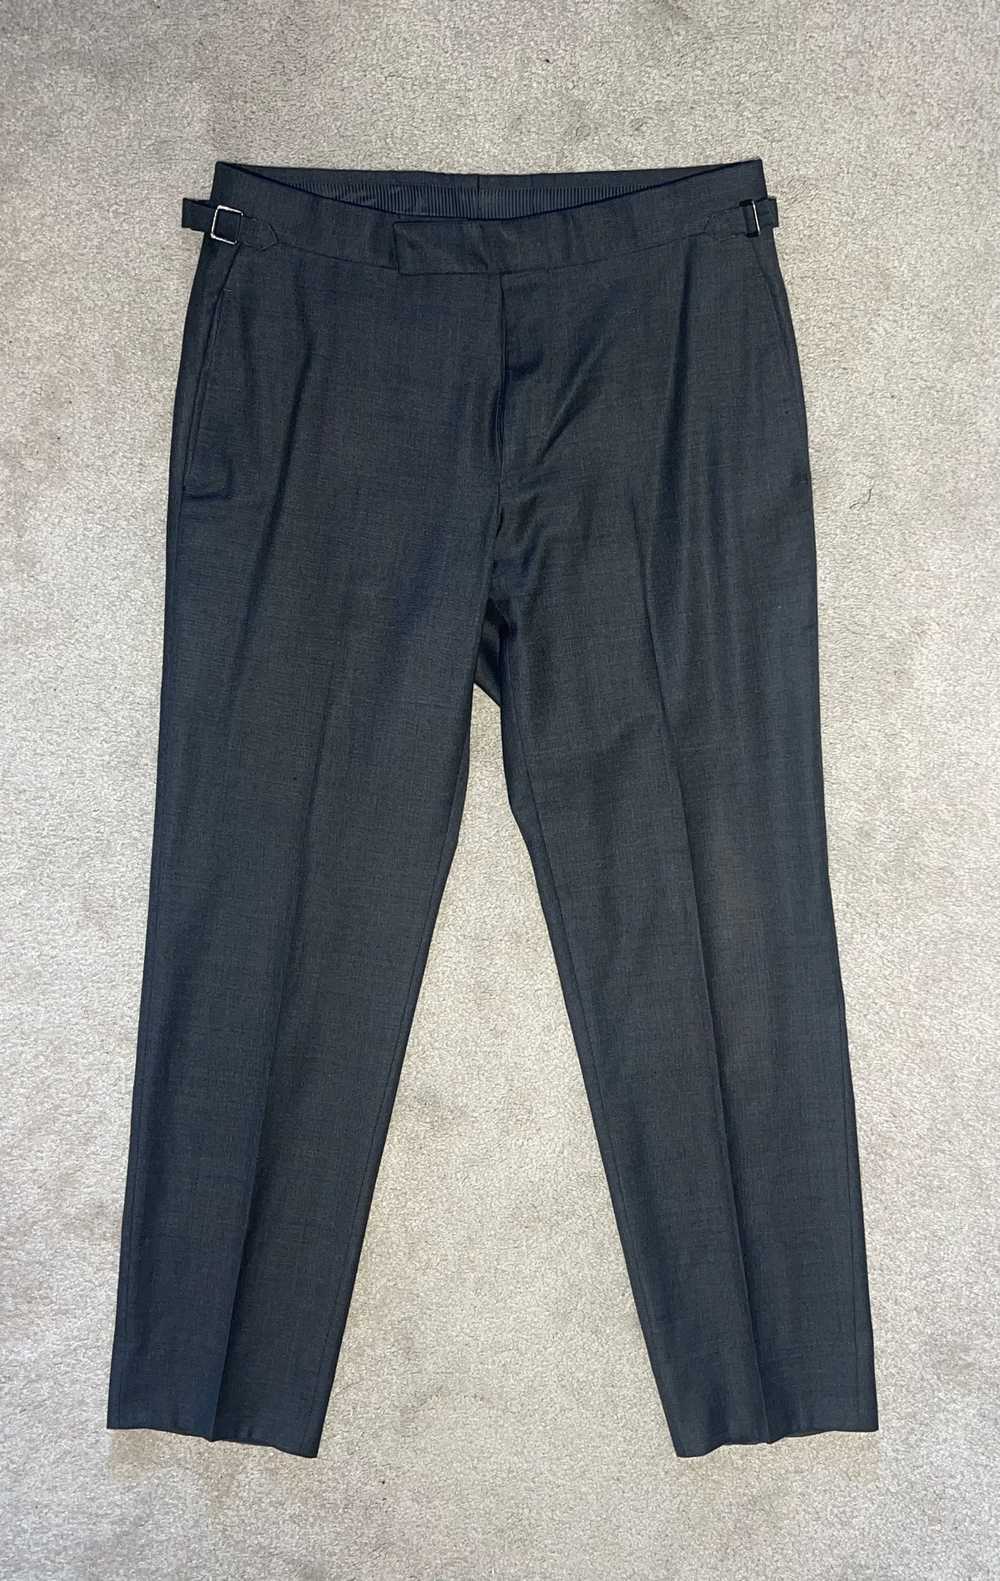 Tom Ford 100% Wool pants - Made in Switzerland - image 1